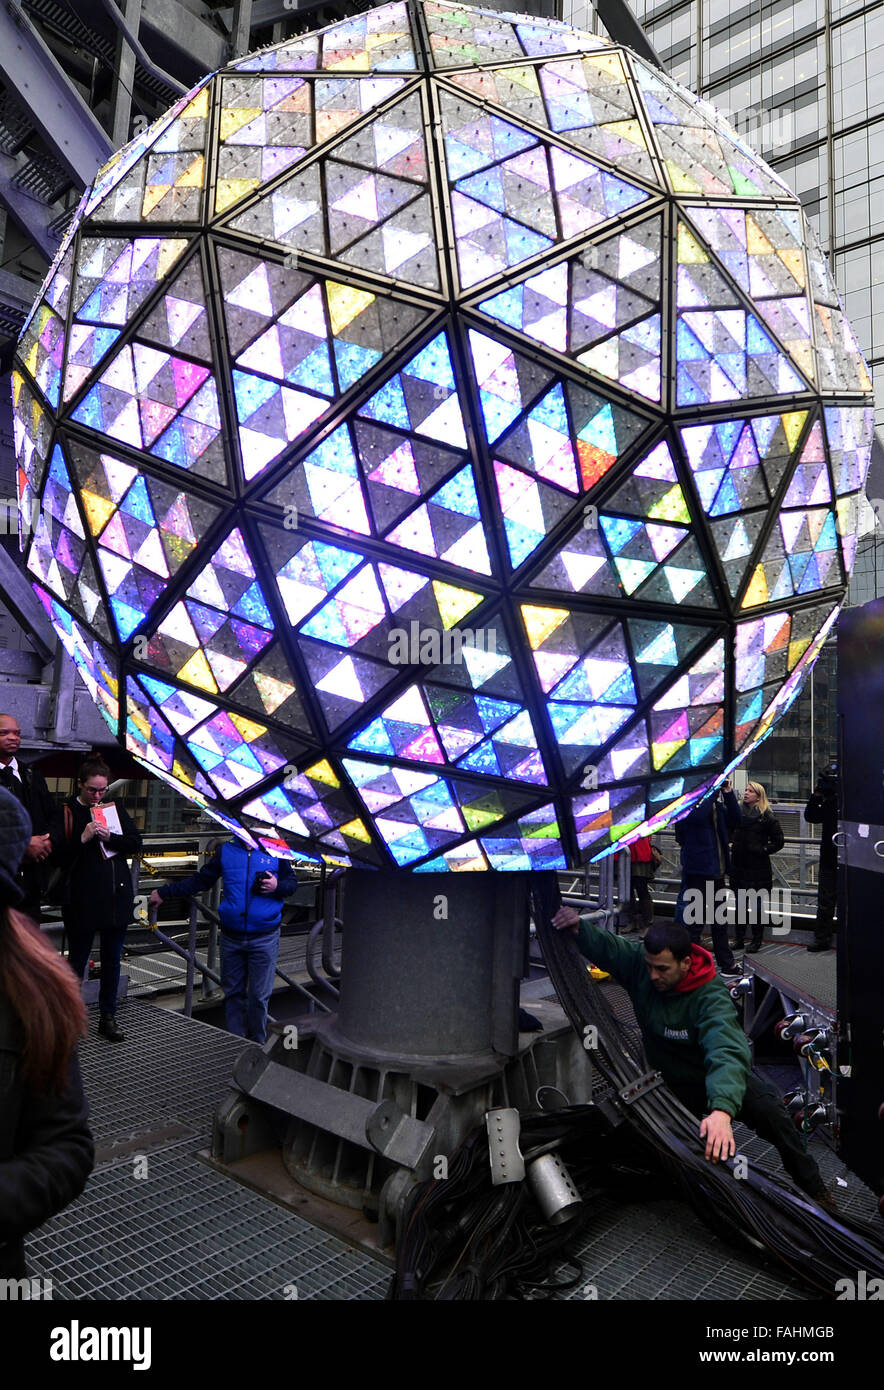 New York, USA. 30th Dec, 2015. The Times Square New Year's Eve Ball is tested the day before the celebrations of New Year's Eve atop the roof of One Times Square, in New York, the United States, on Dec. 30, 2015. The iconic Times Square New Year's Eve Ball is lit and sent up the 130-foot pole atop One Times Square on Wednesday for final preparations. The 32,000 LEDs that are in the ball can be individually controlled by software. Credit:  Wang Lei/Xinhua/Alamy Live News Stock Photo